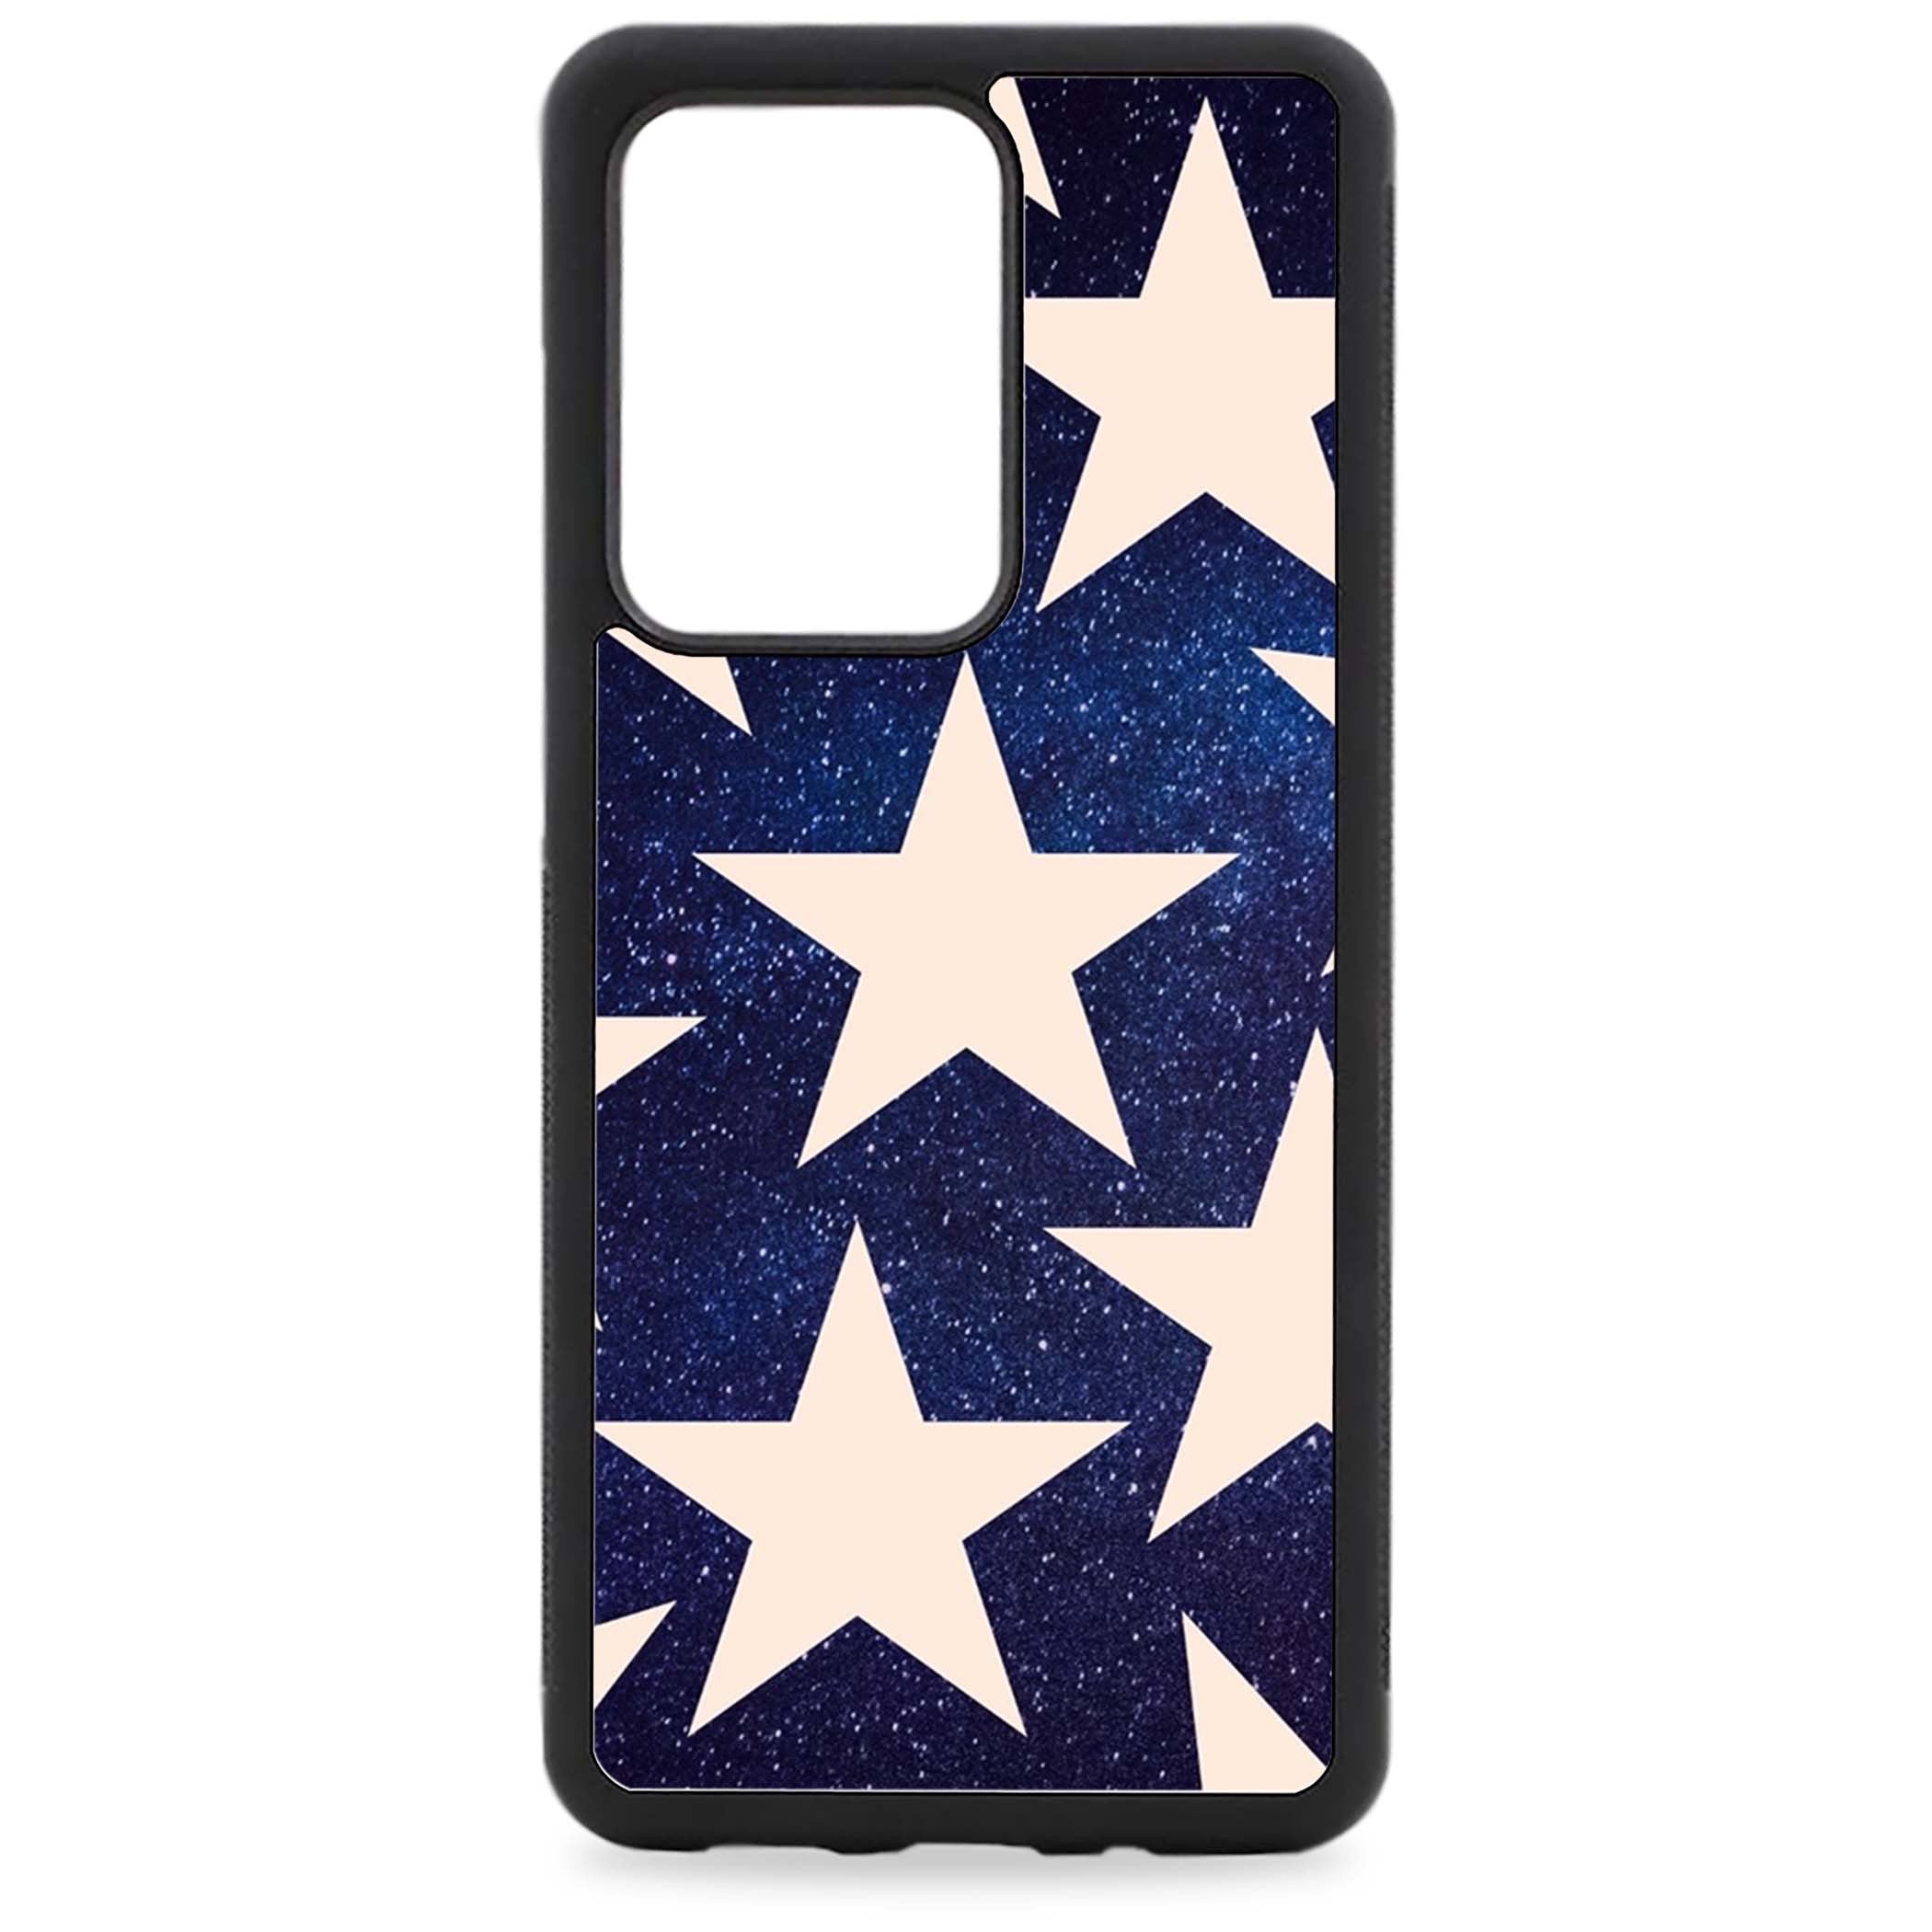 Vintage Style Star Print Phone Case For Samsung